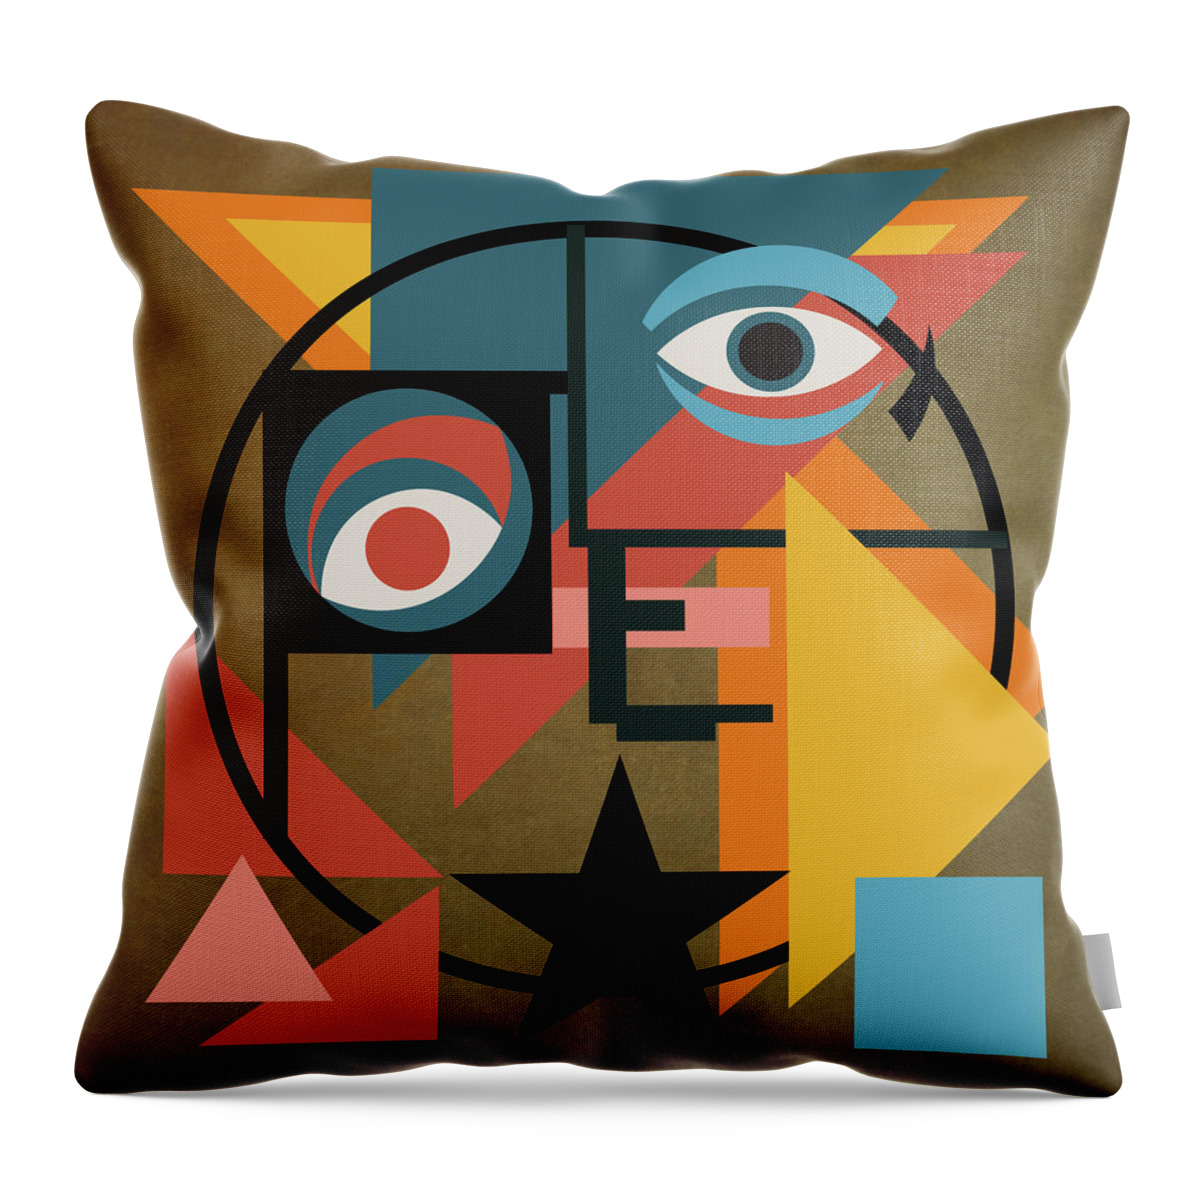 Bowie Throw Pillow featuring the mixed media Bauhaus Pop by Big Fat Arts